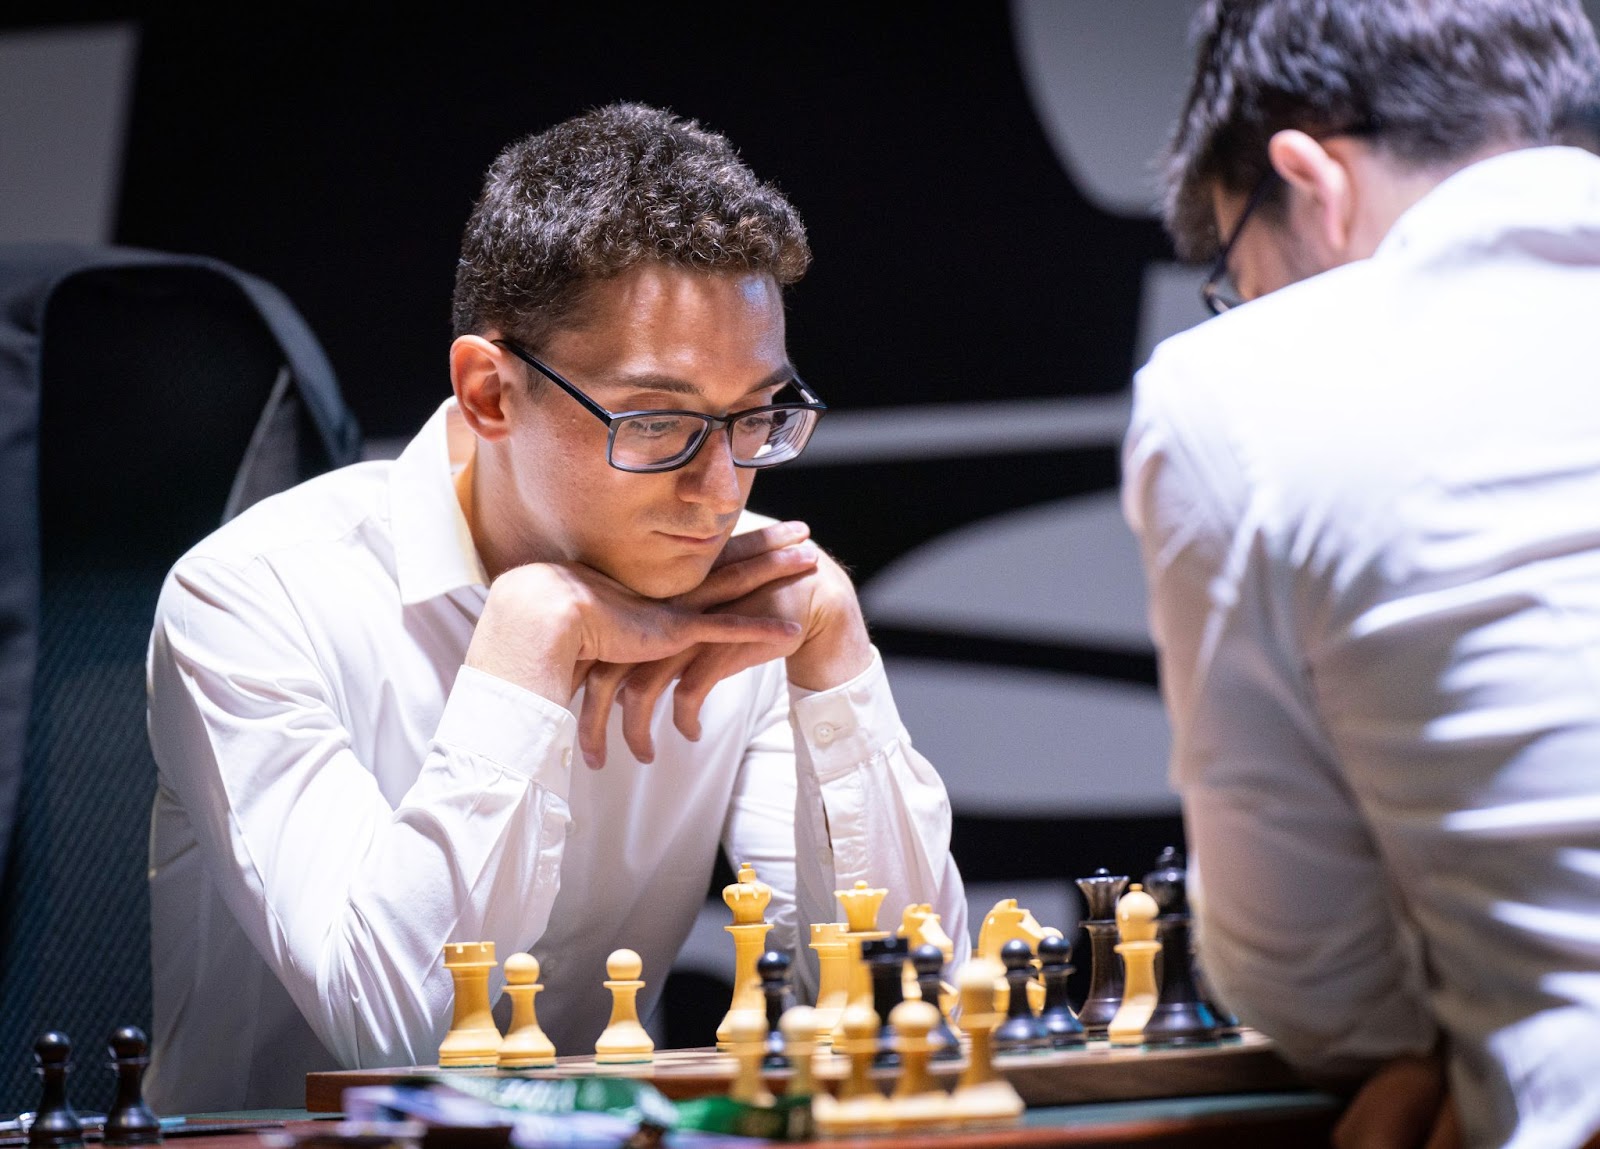 Nepo and Caruana Win in Sixth Round of Candidates